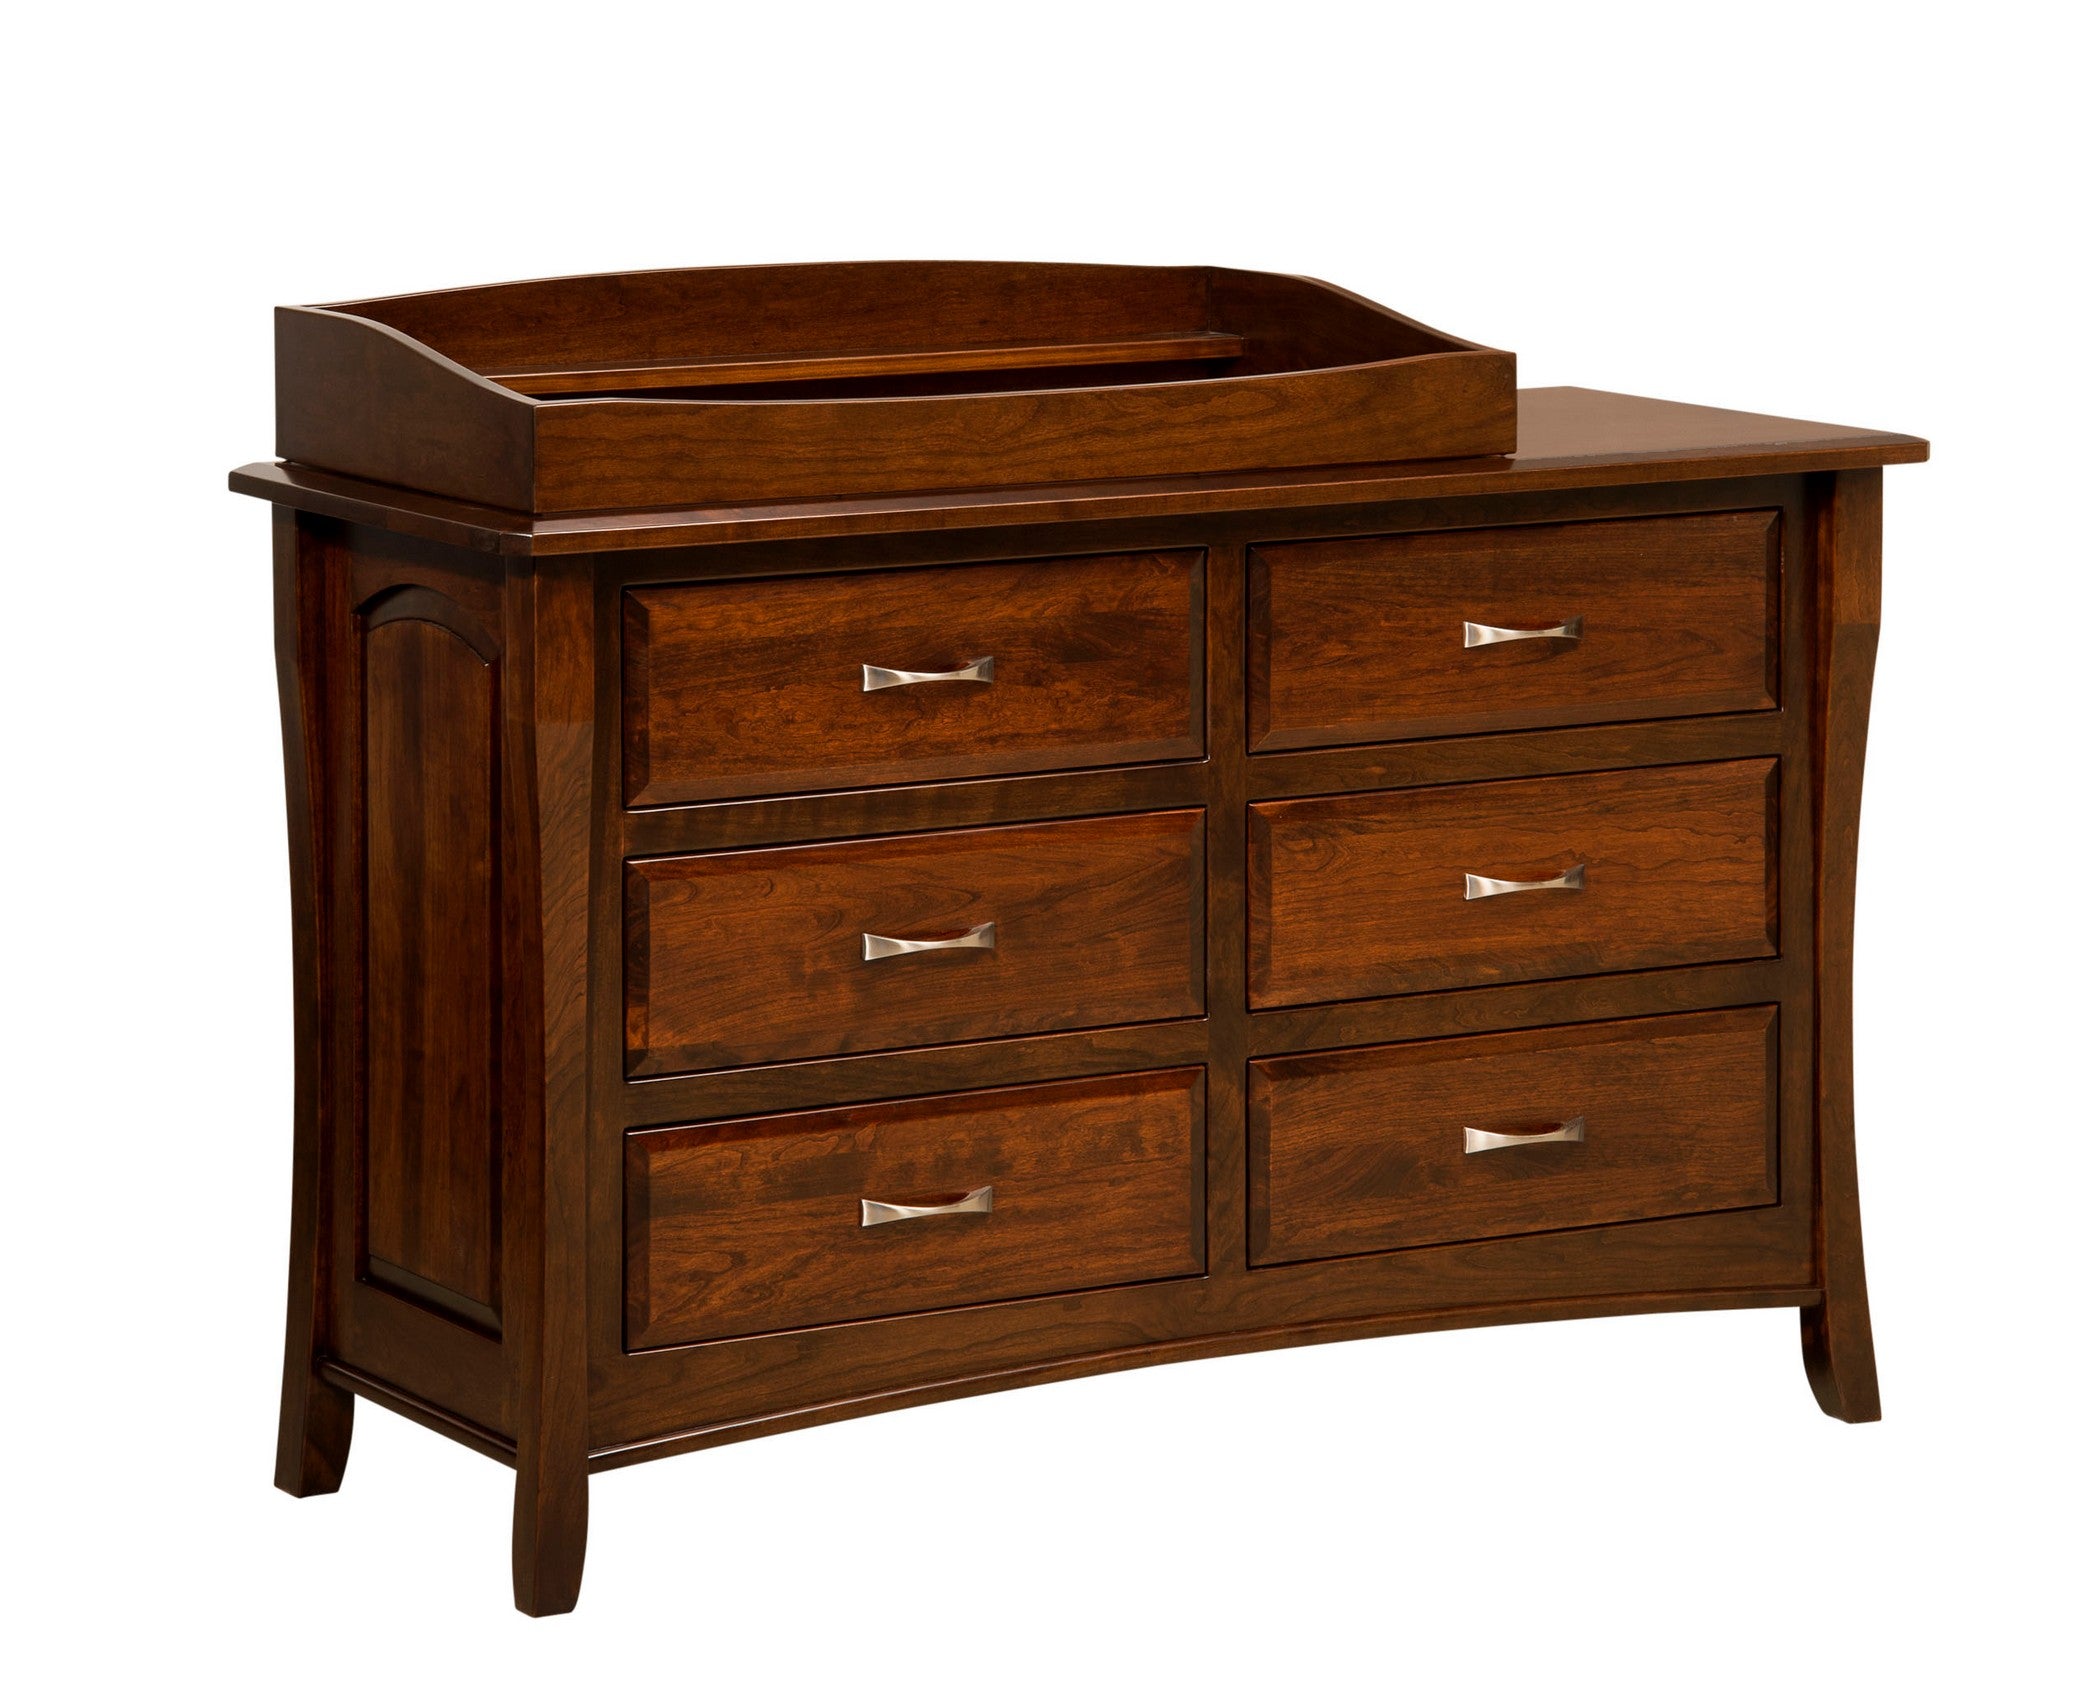 berkley six drawer dresser in sap cherry wood with rich tobacco stain and changing box